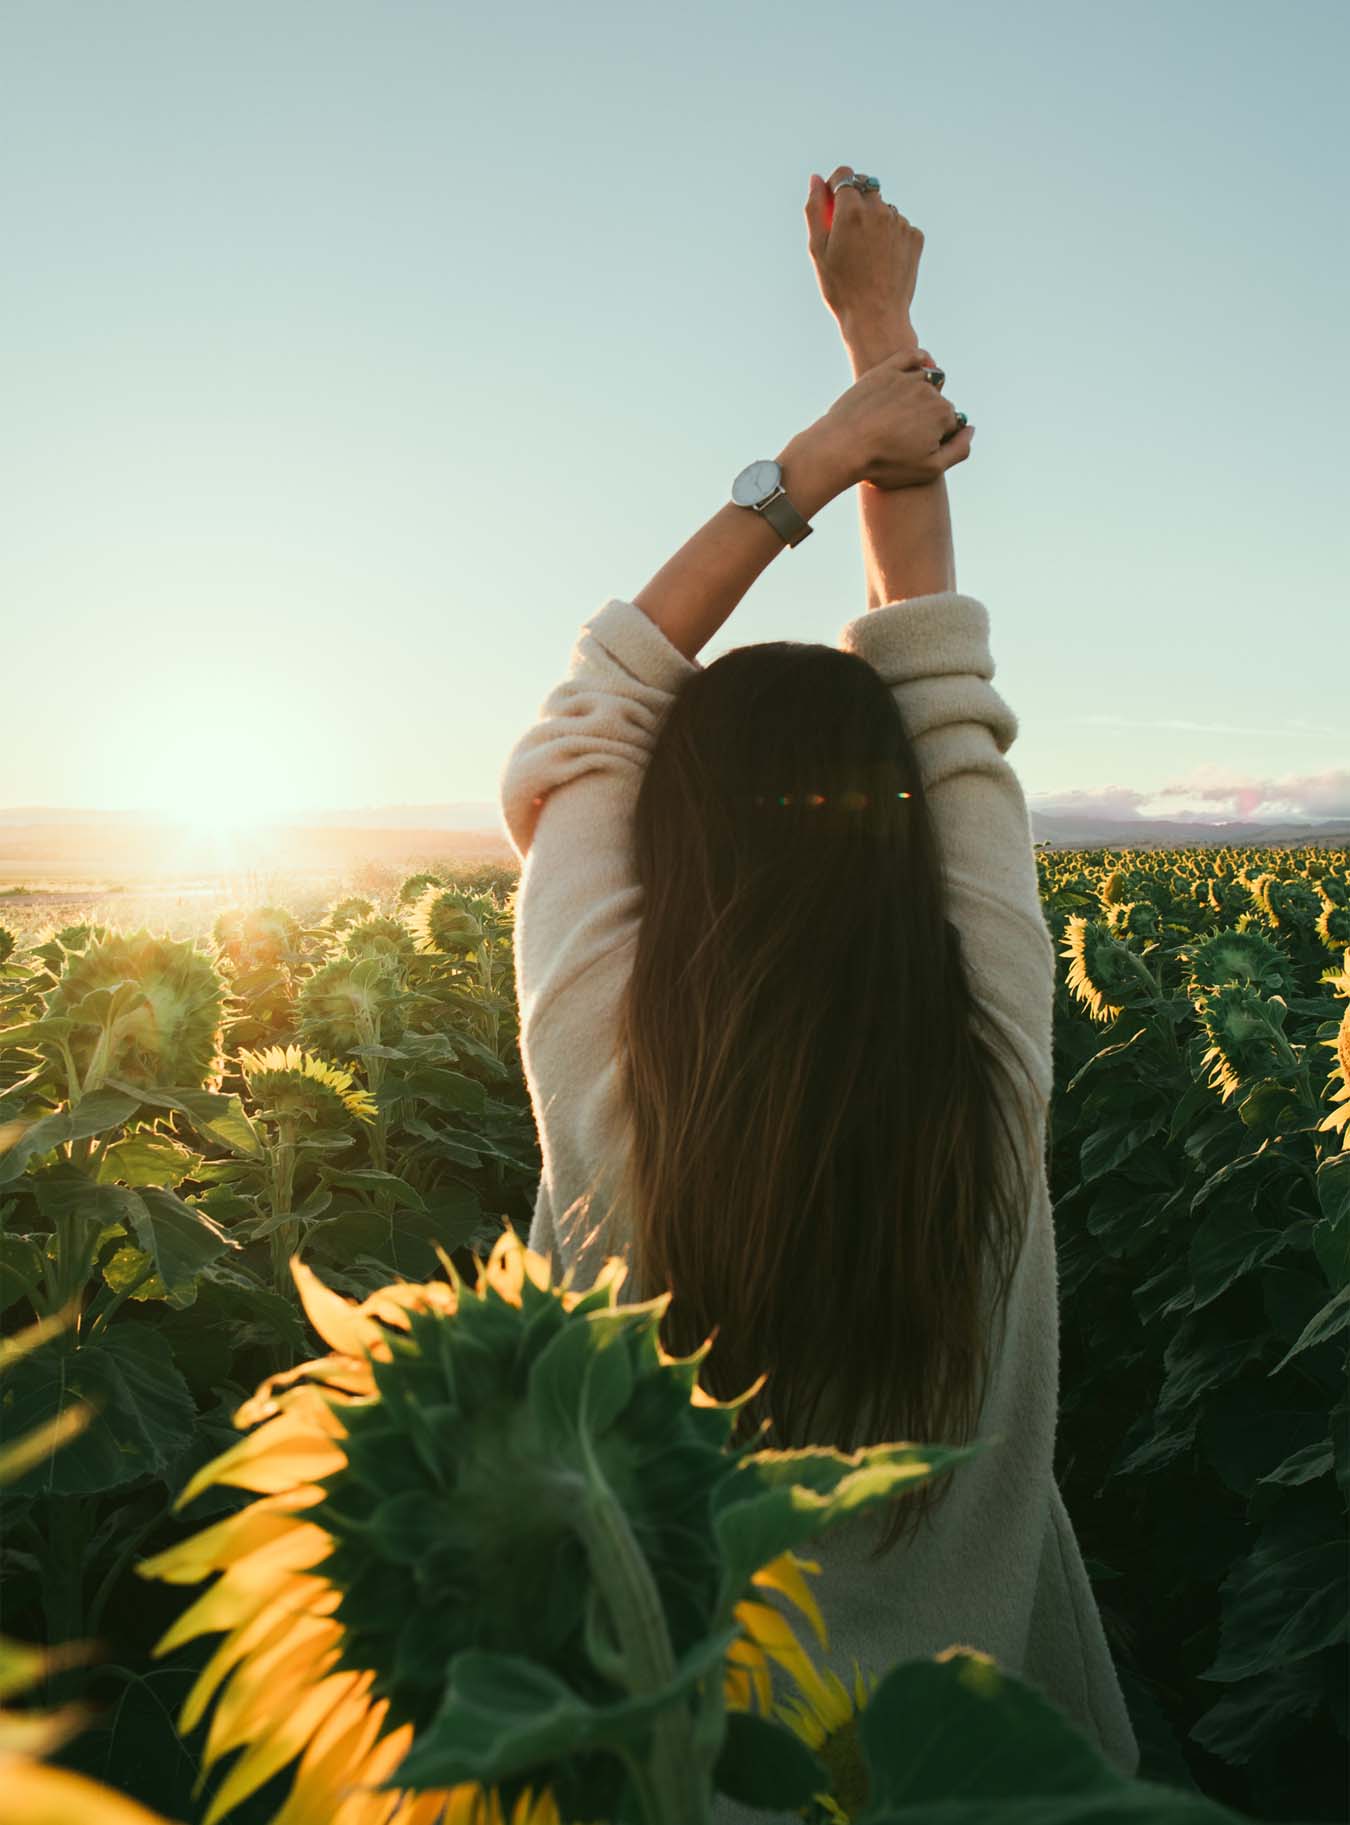 A young woman stands with her back to us in a sunflower field, raised her arms and enjoys the sun.